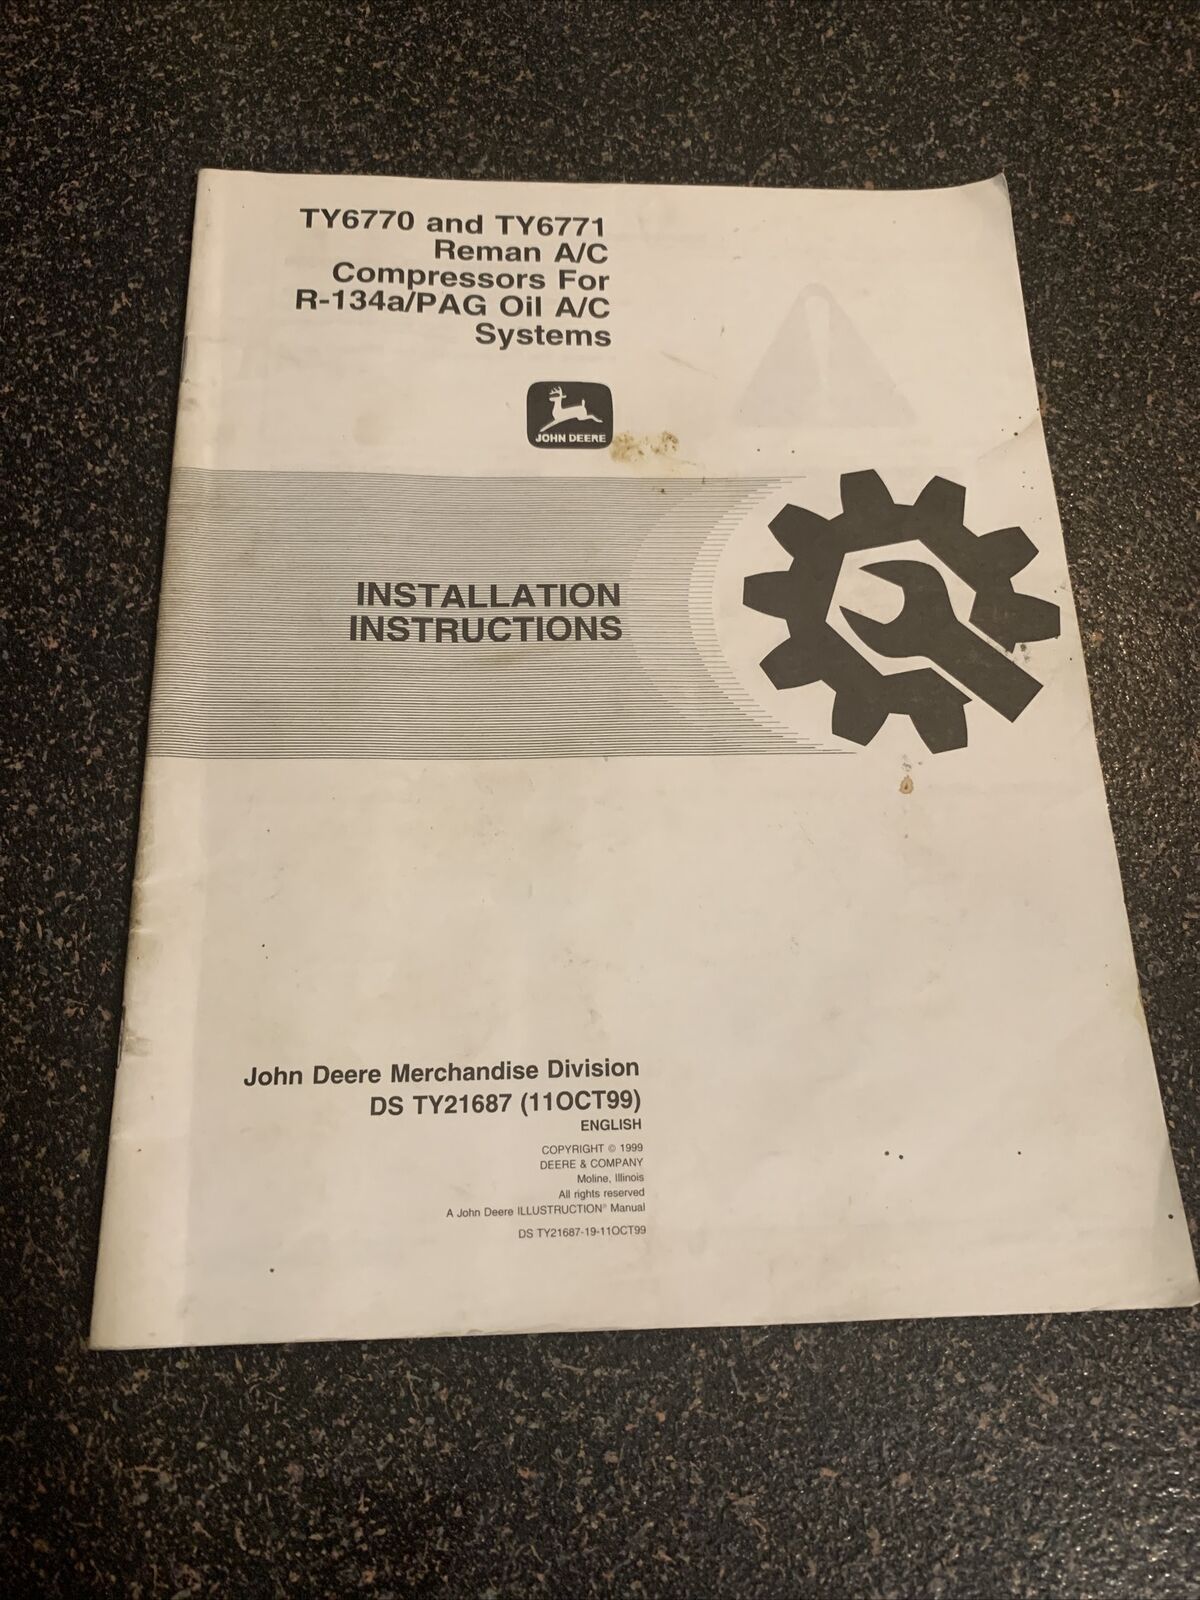 John Deere Ty6770 And Ty6771 Reman A/c compressors Instillation Instructions